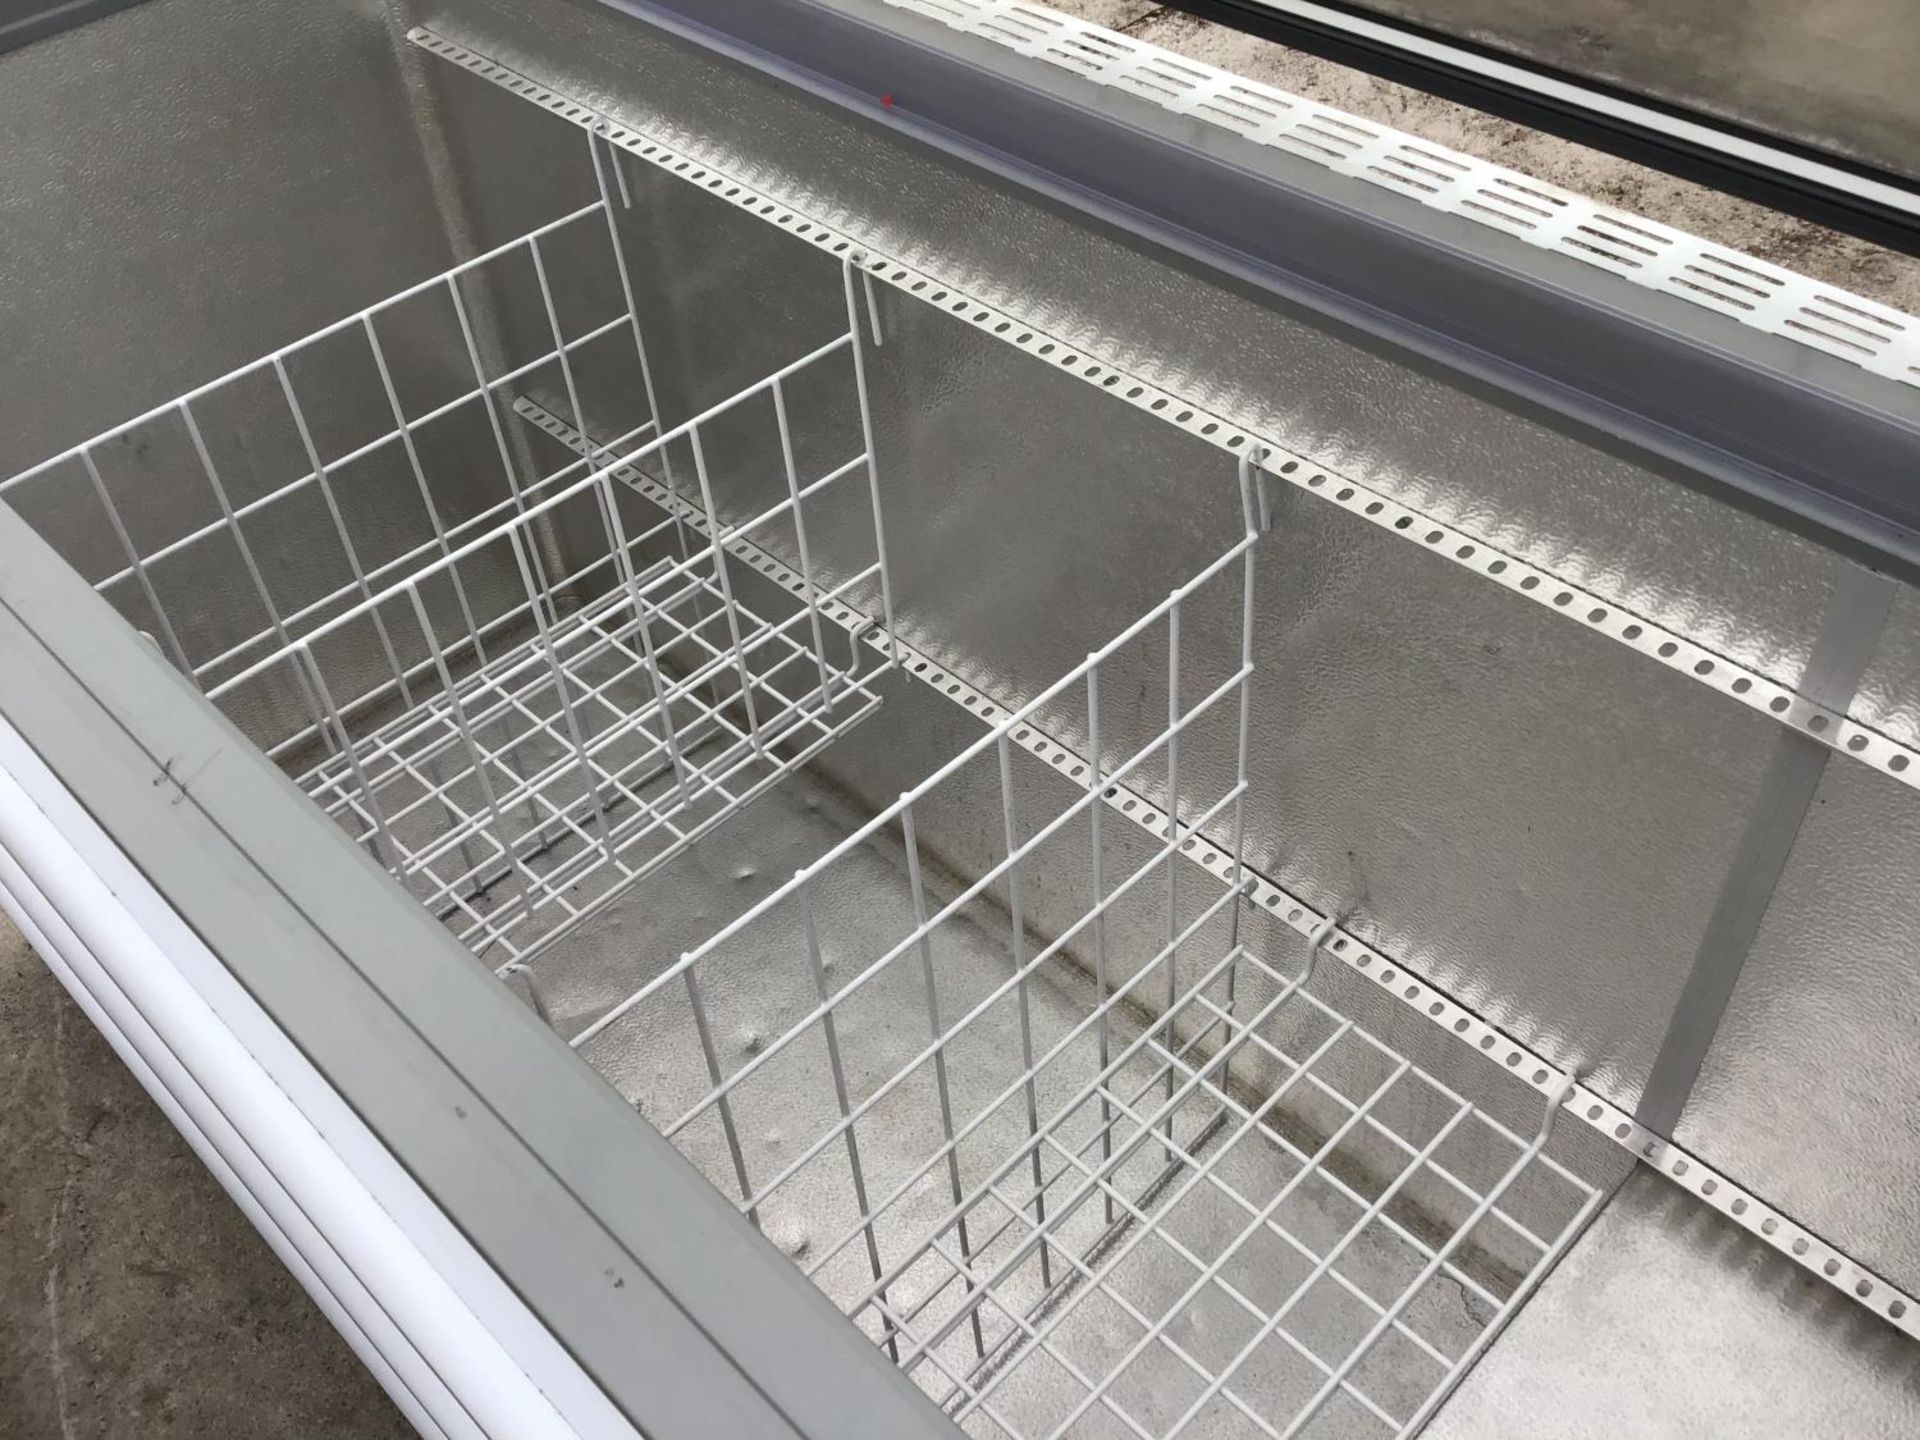 A LARGE SHOP CHEST FREEZER WITH BASKETS REGULARLY MAINTAINED AND IN CLEAN AND WORKING ORDER - Image 3 of 3